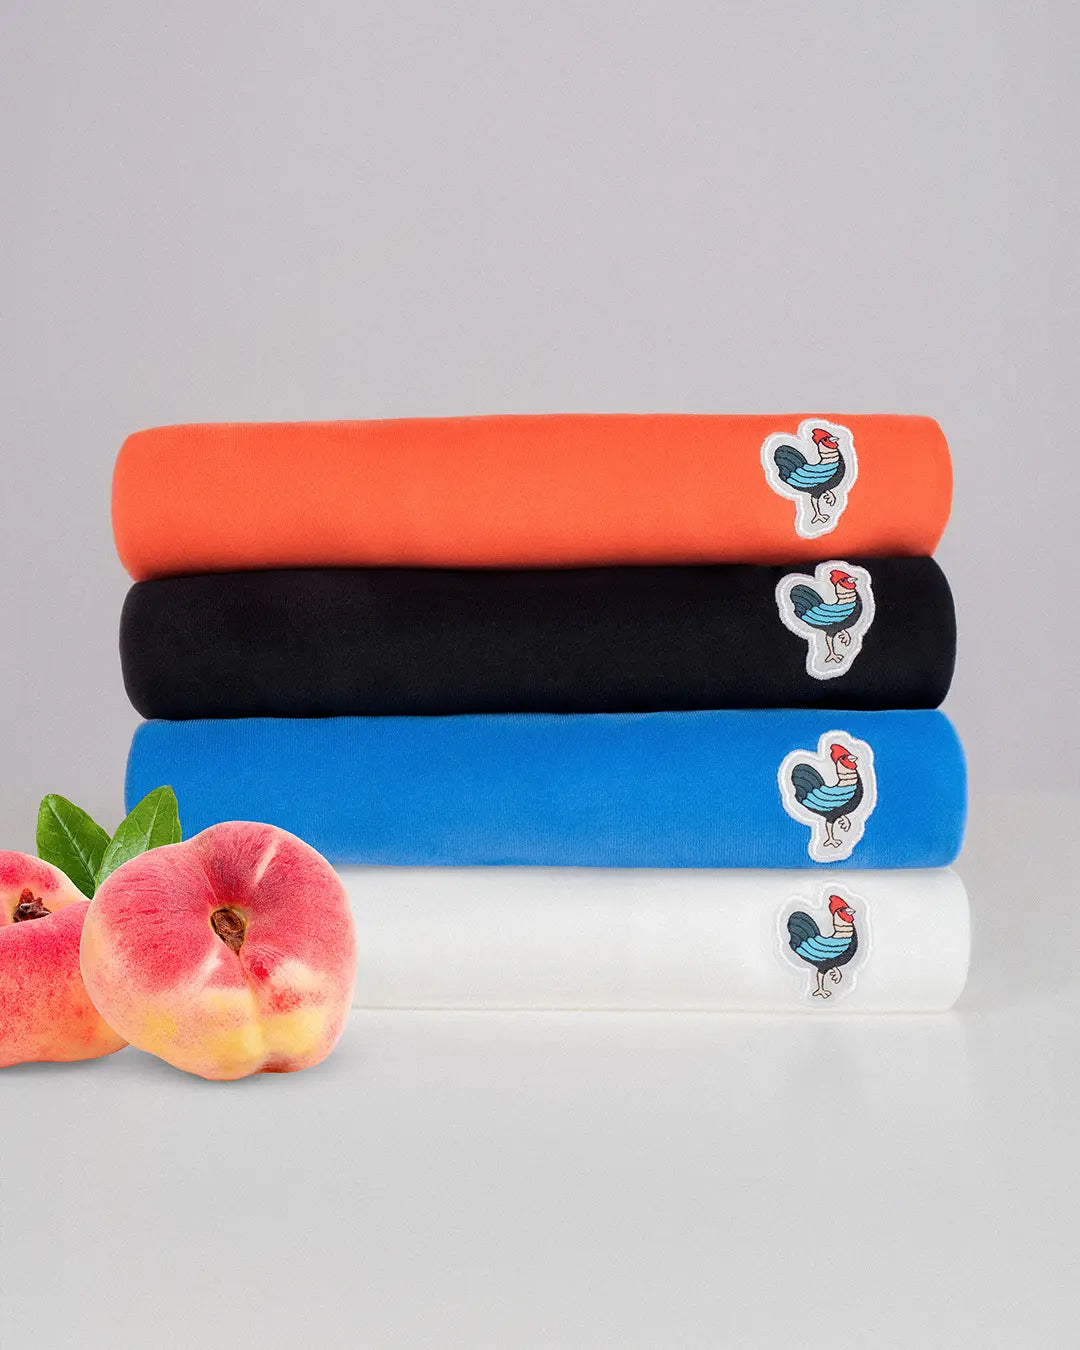 Défier oversize T-Shirts with Peachskin-Effekt in red, black, blue and white.